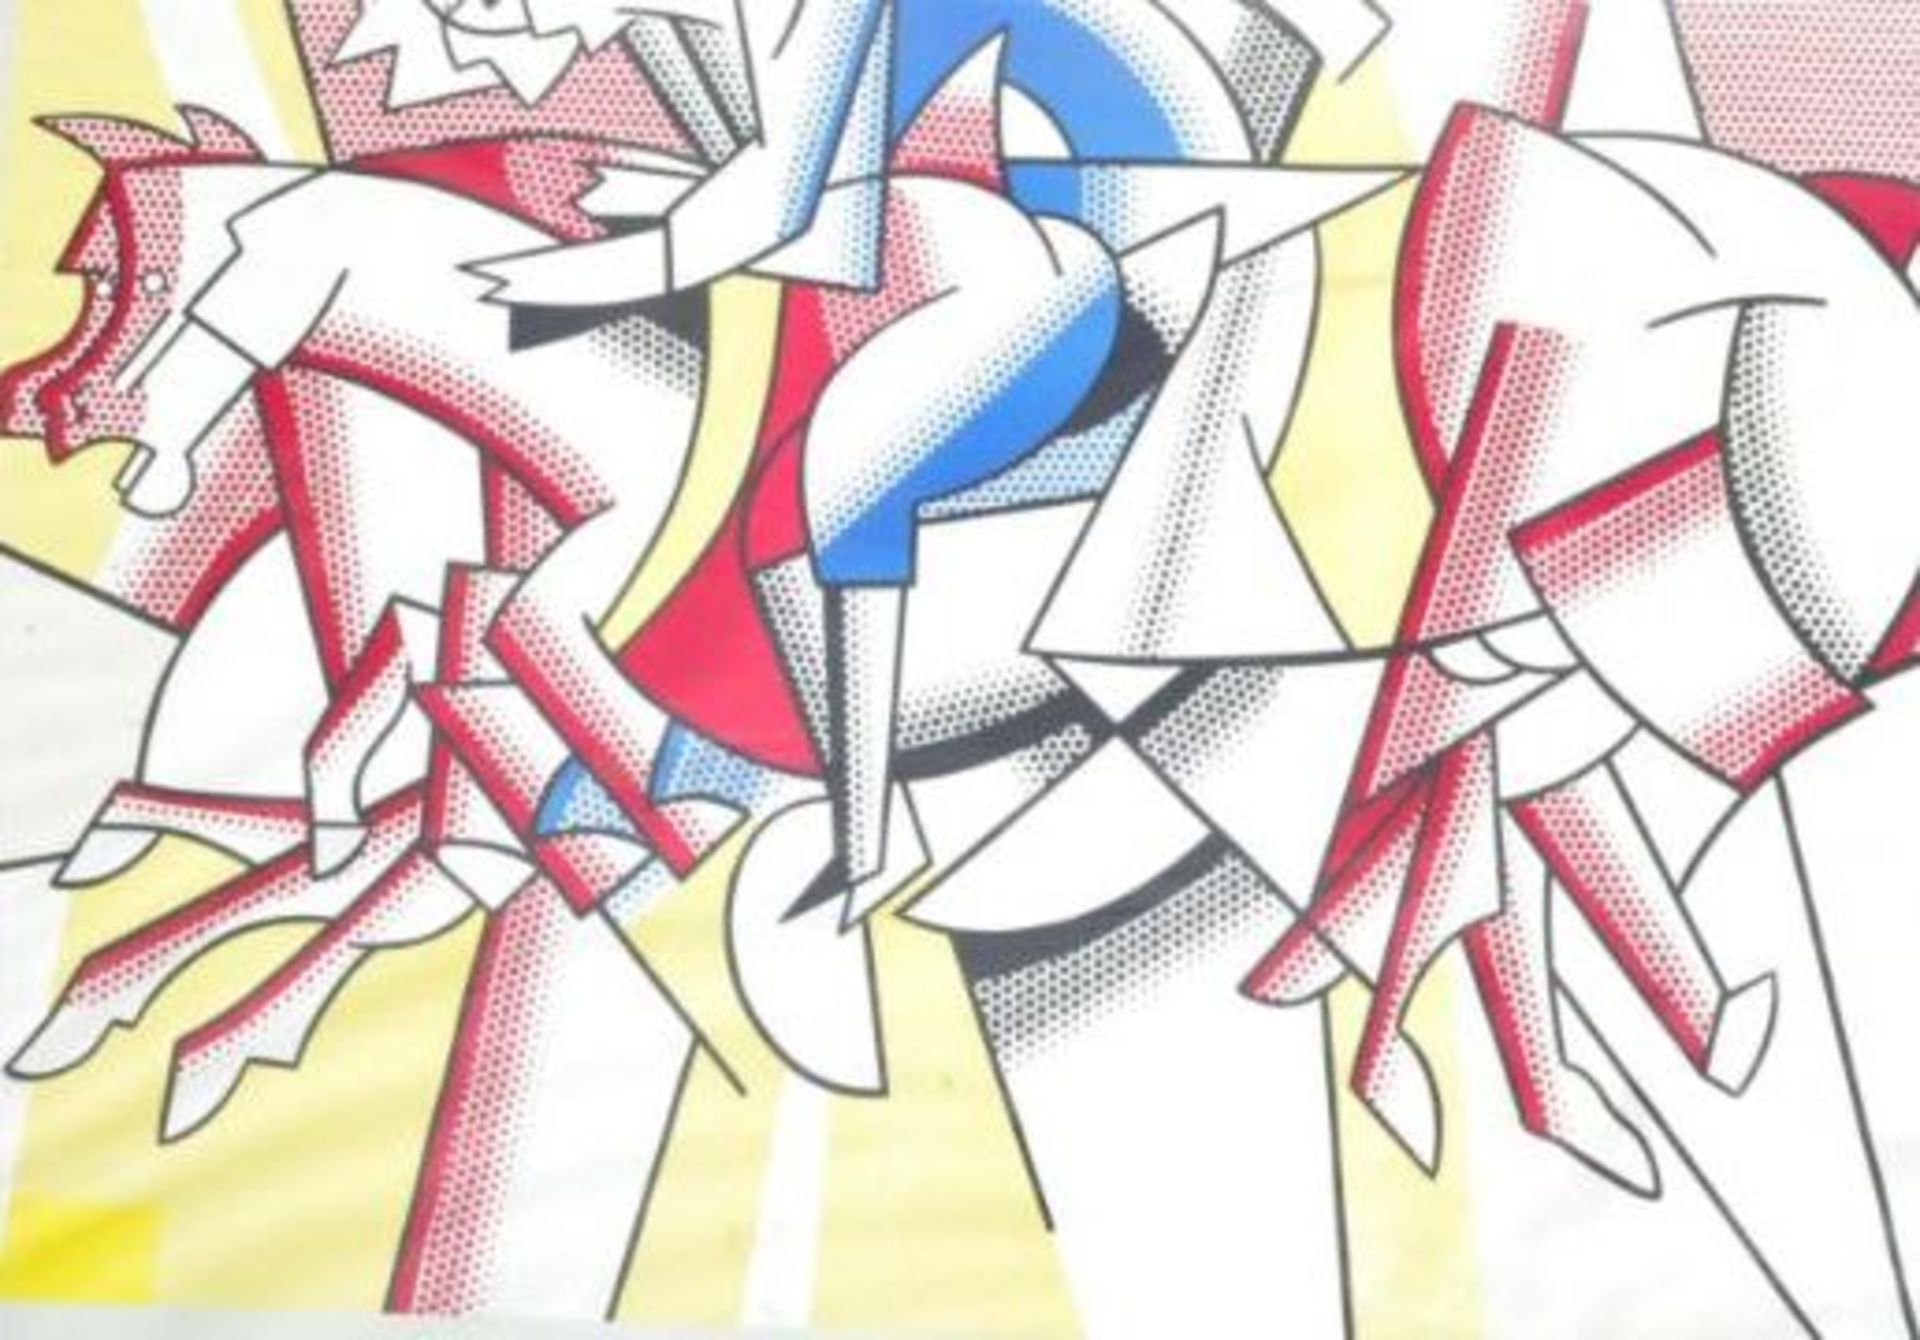 ROY LICHTENSTEIN - THE RED HORSEMAN LITHOGRAPH EXHIBITION POSTER - Image 5 of 6